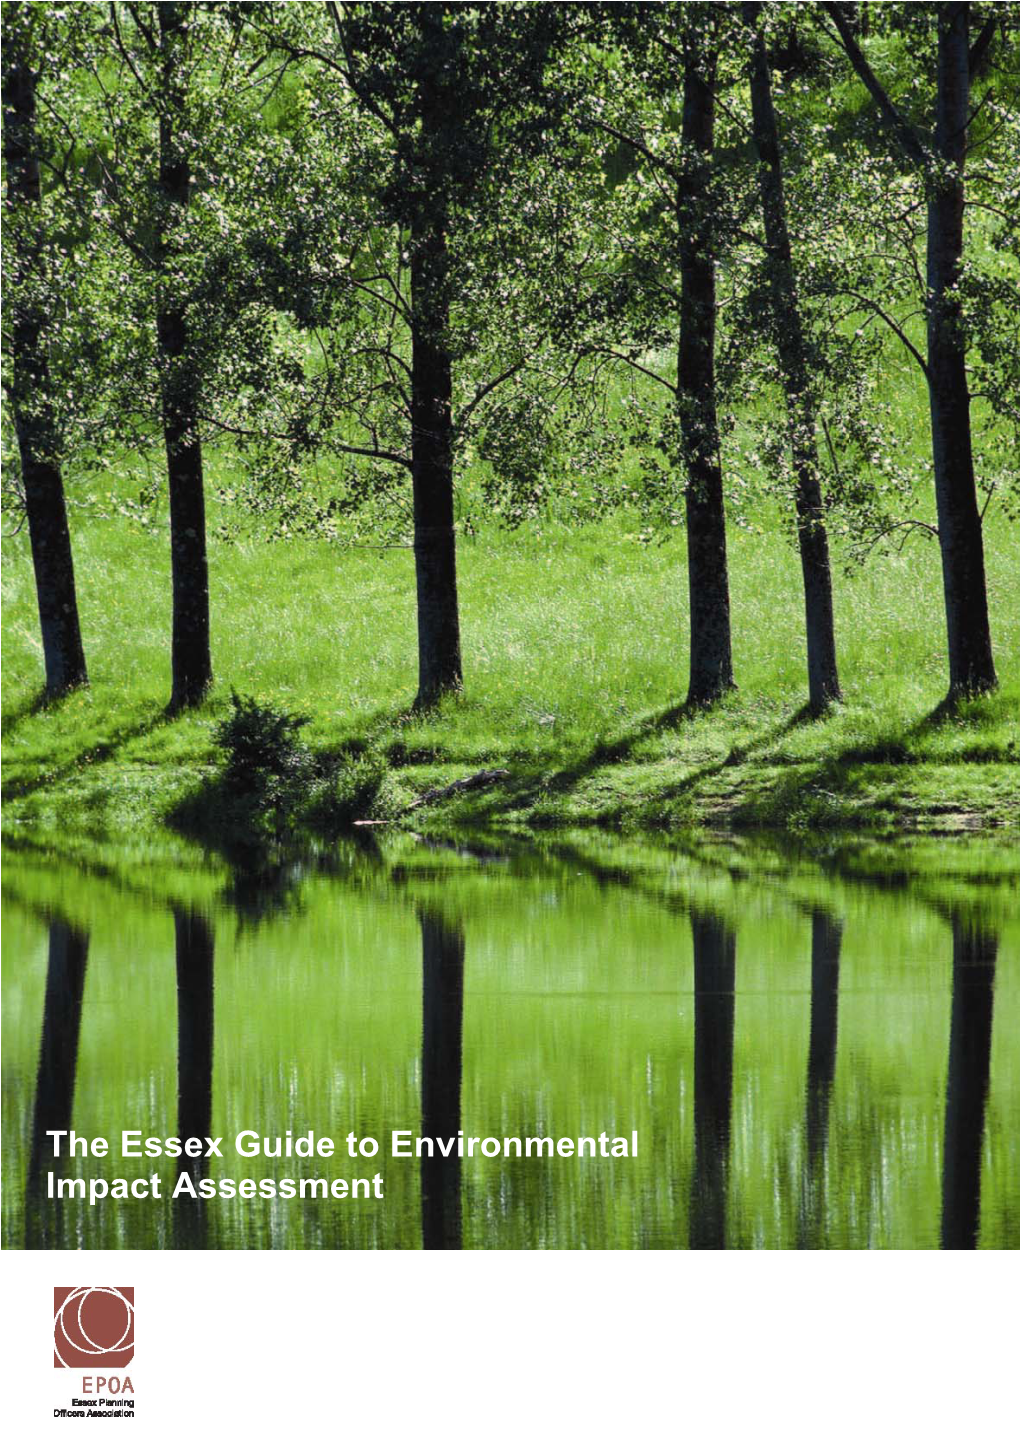 The Essex Guide to Environmental Impact Assessment